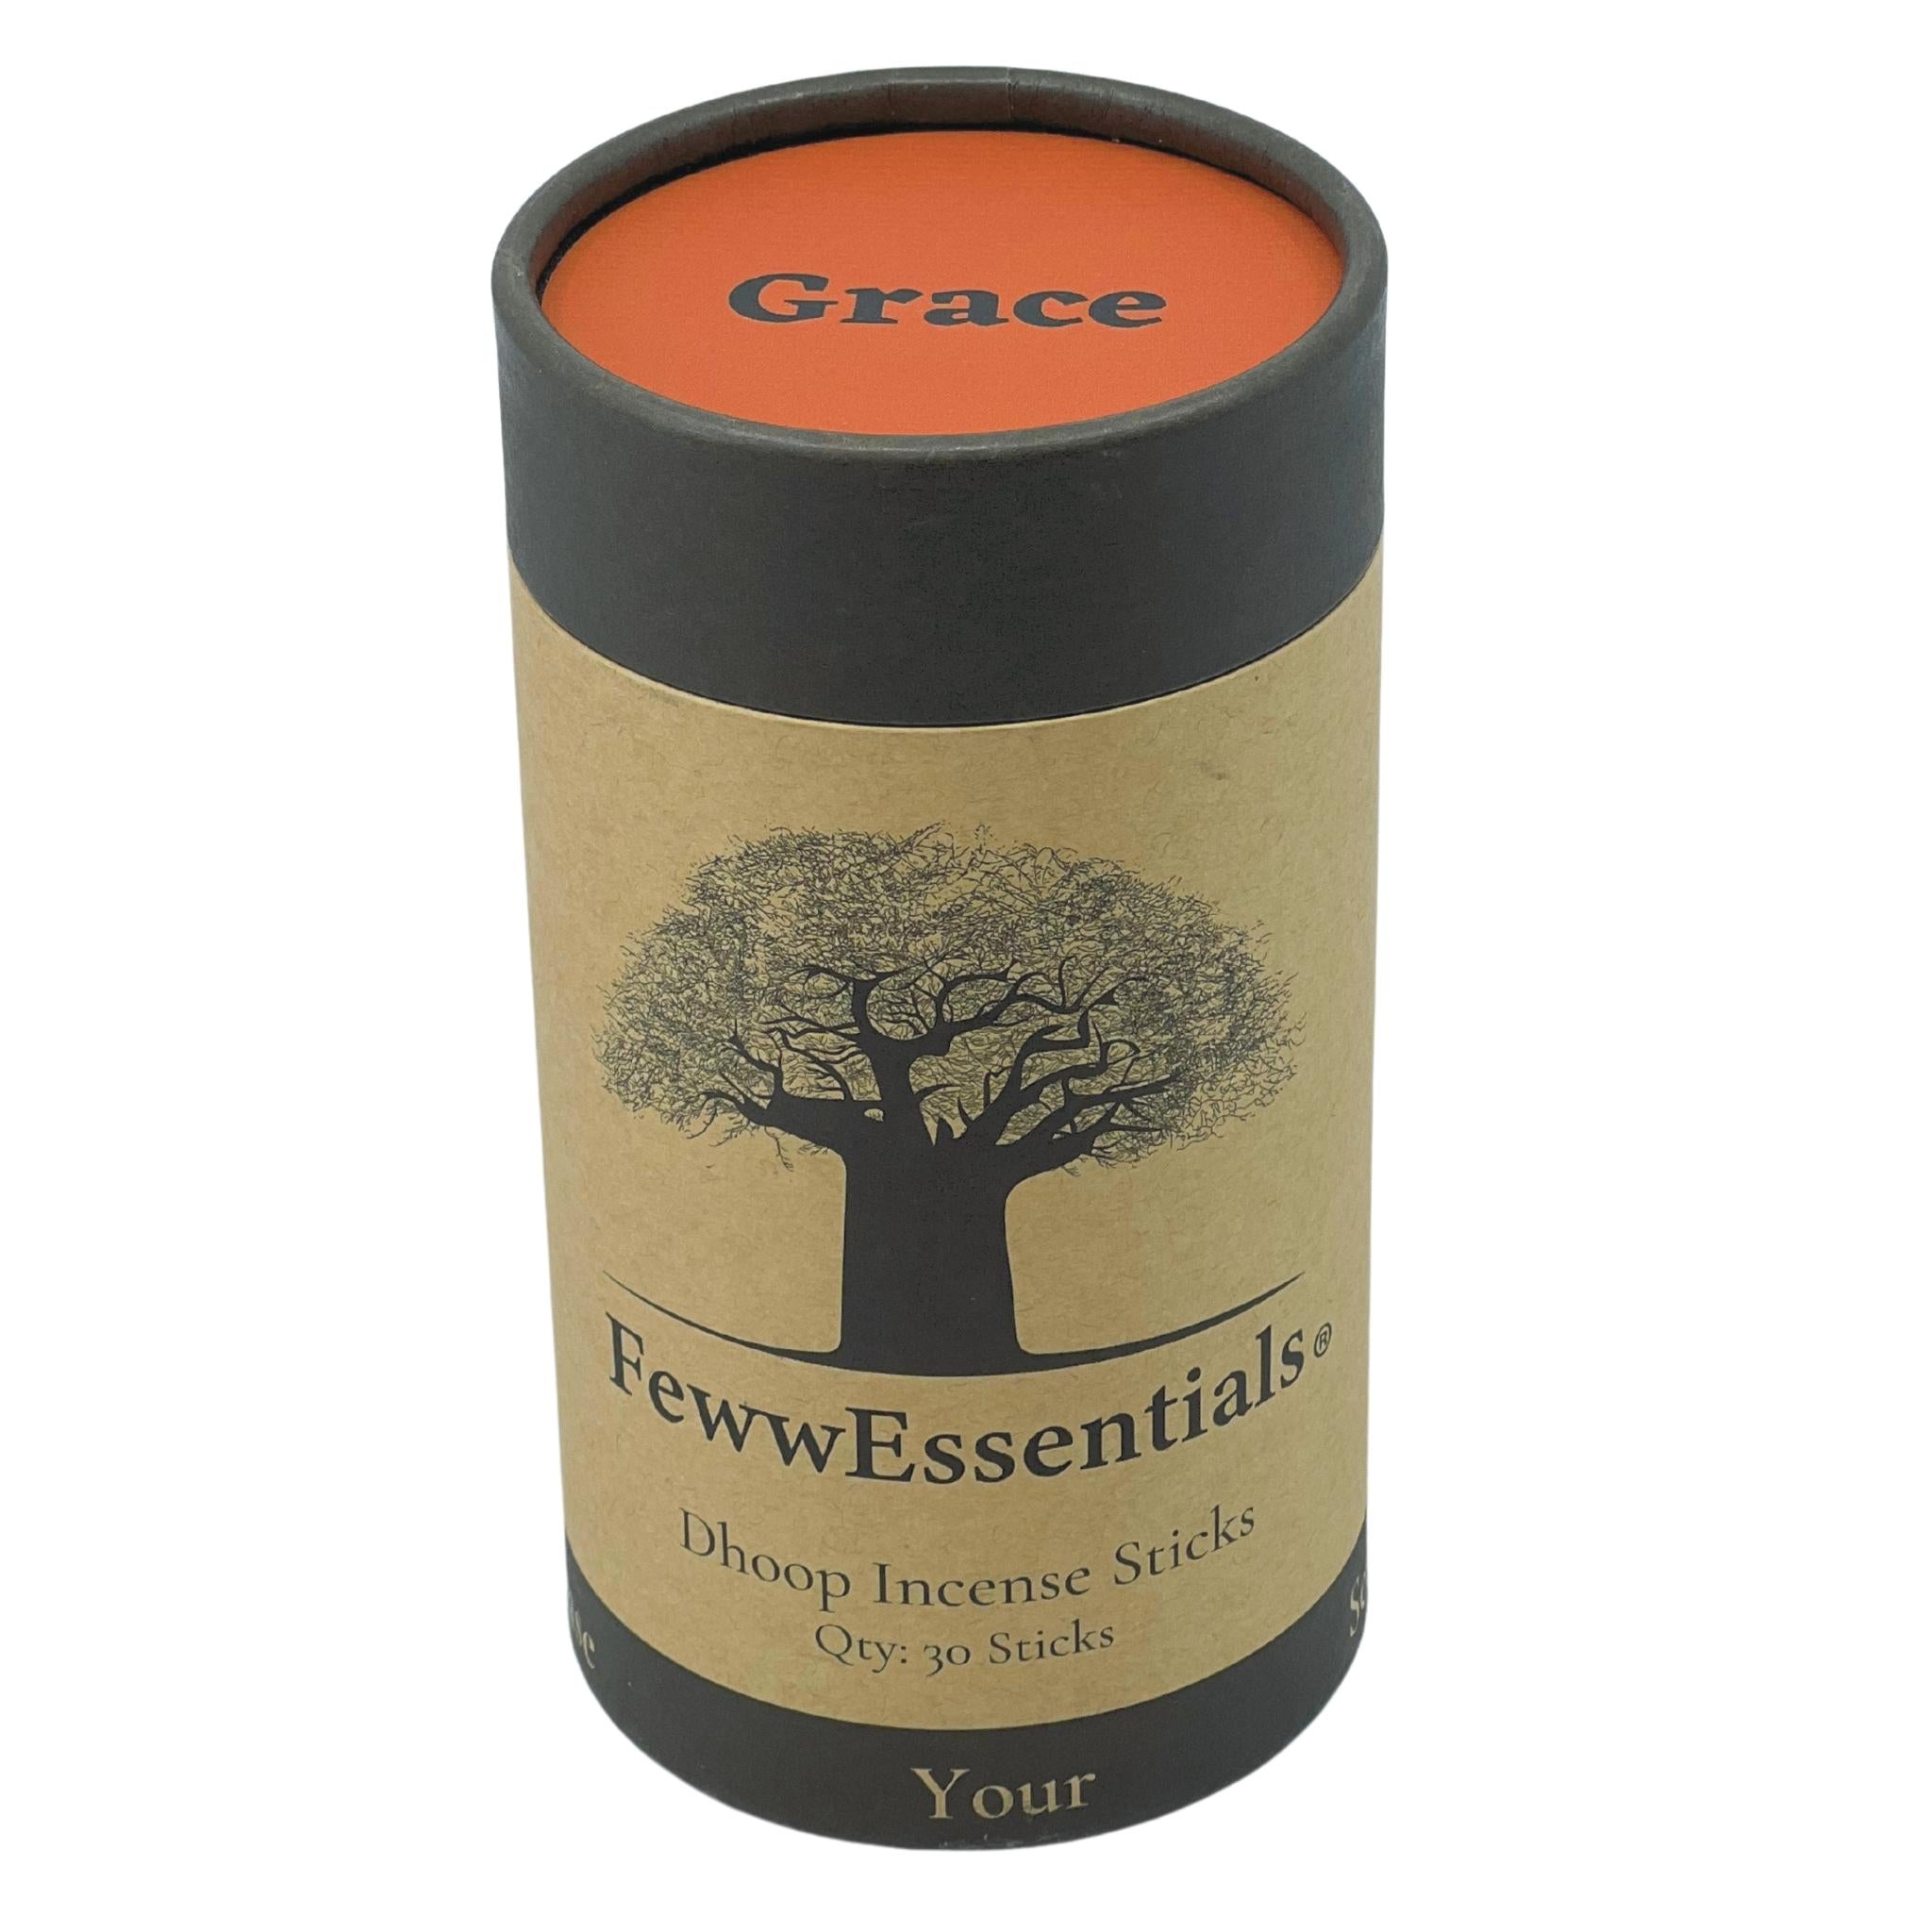 Image of FewwEssentials Dhoop Incense Sticks with the scent name Grace in a Circular Kraft Brown Box with Orange Lid